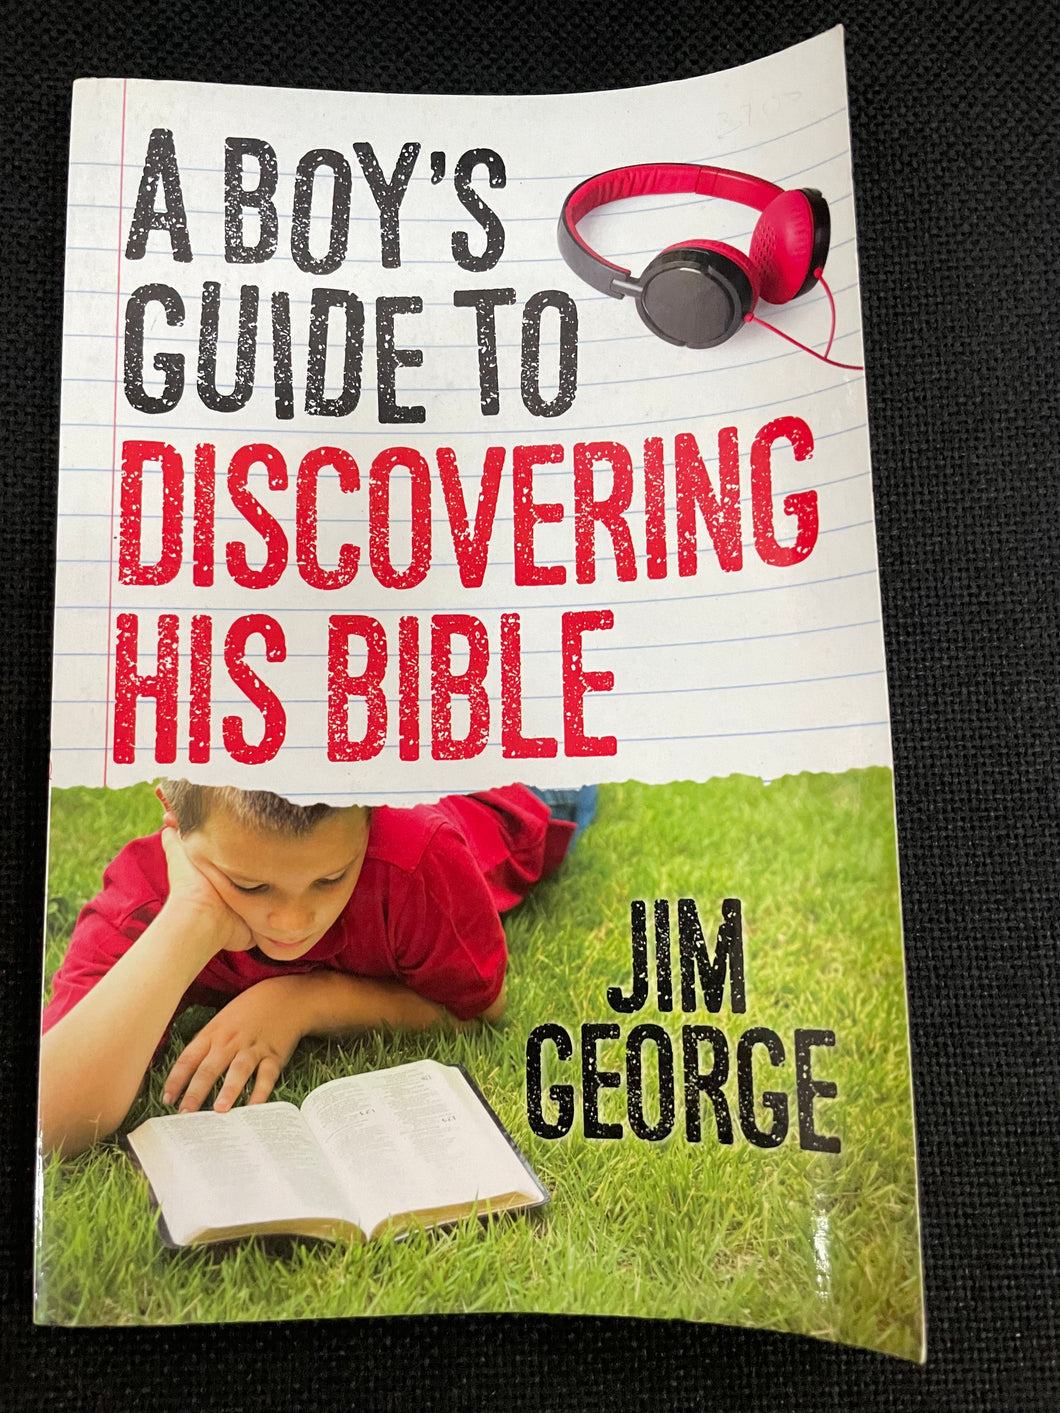 A BOY’S GUIDE TO DISCOVERING HIS BIBLE